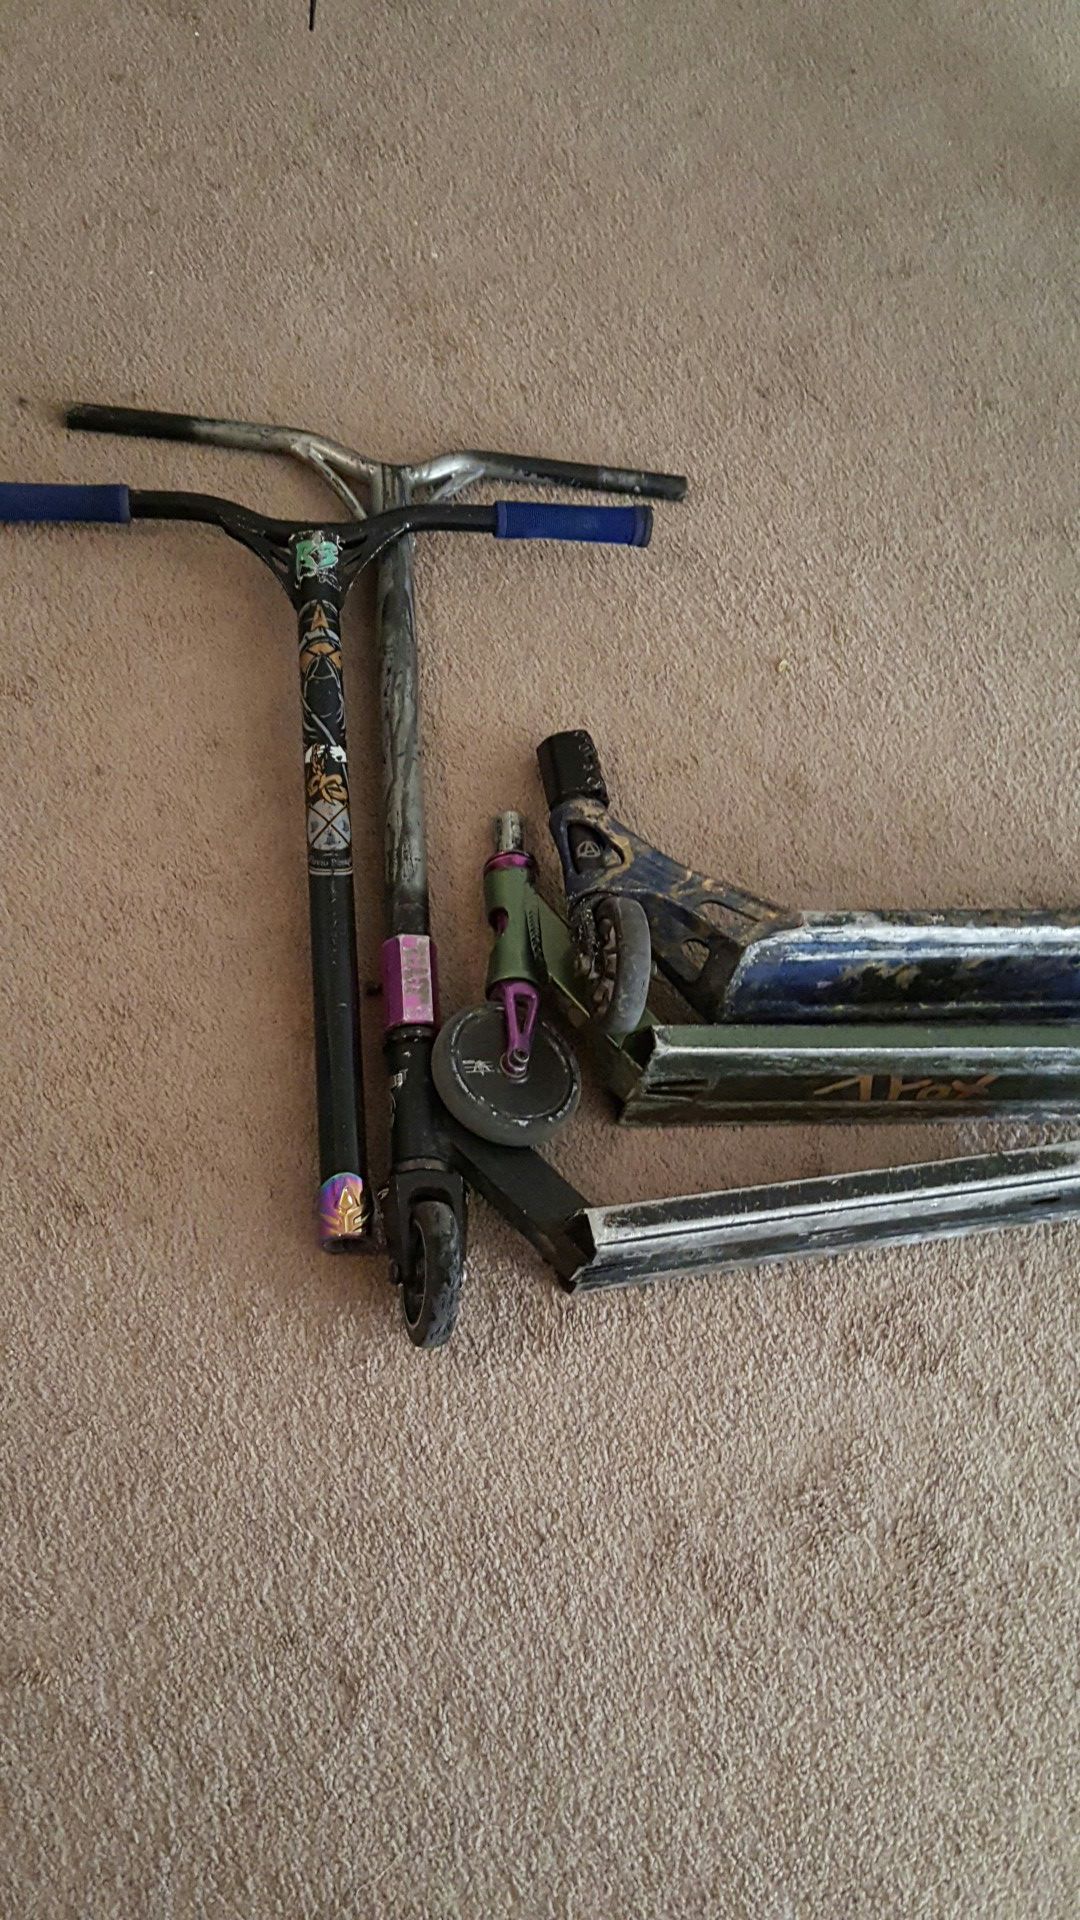 at straffe Arthur Conan Doyle Peck Pro scooter scooter parts for Sale in Mesa, AZ - OfferUp